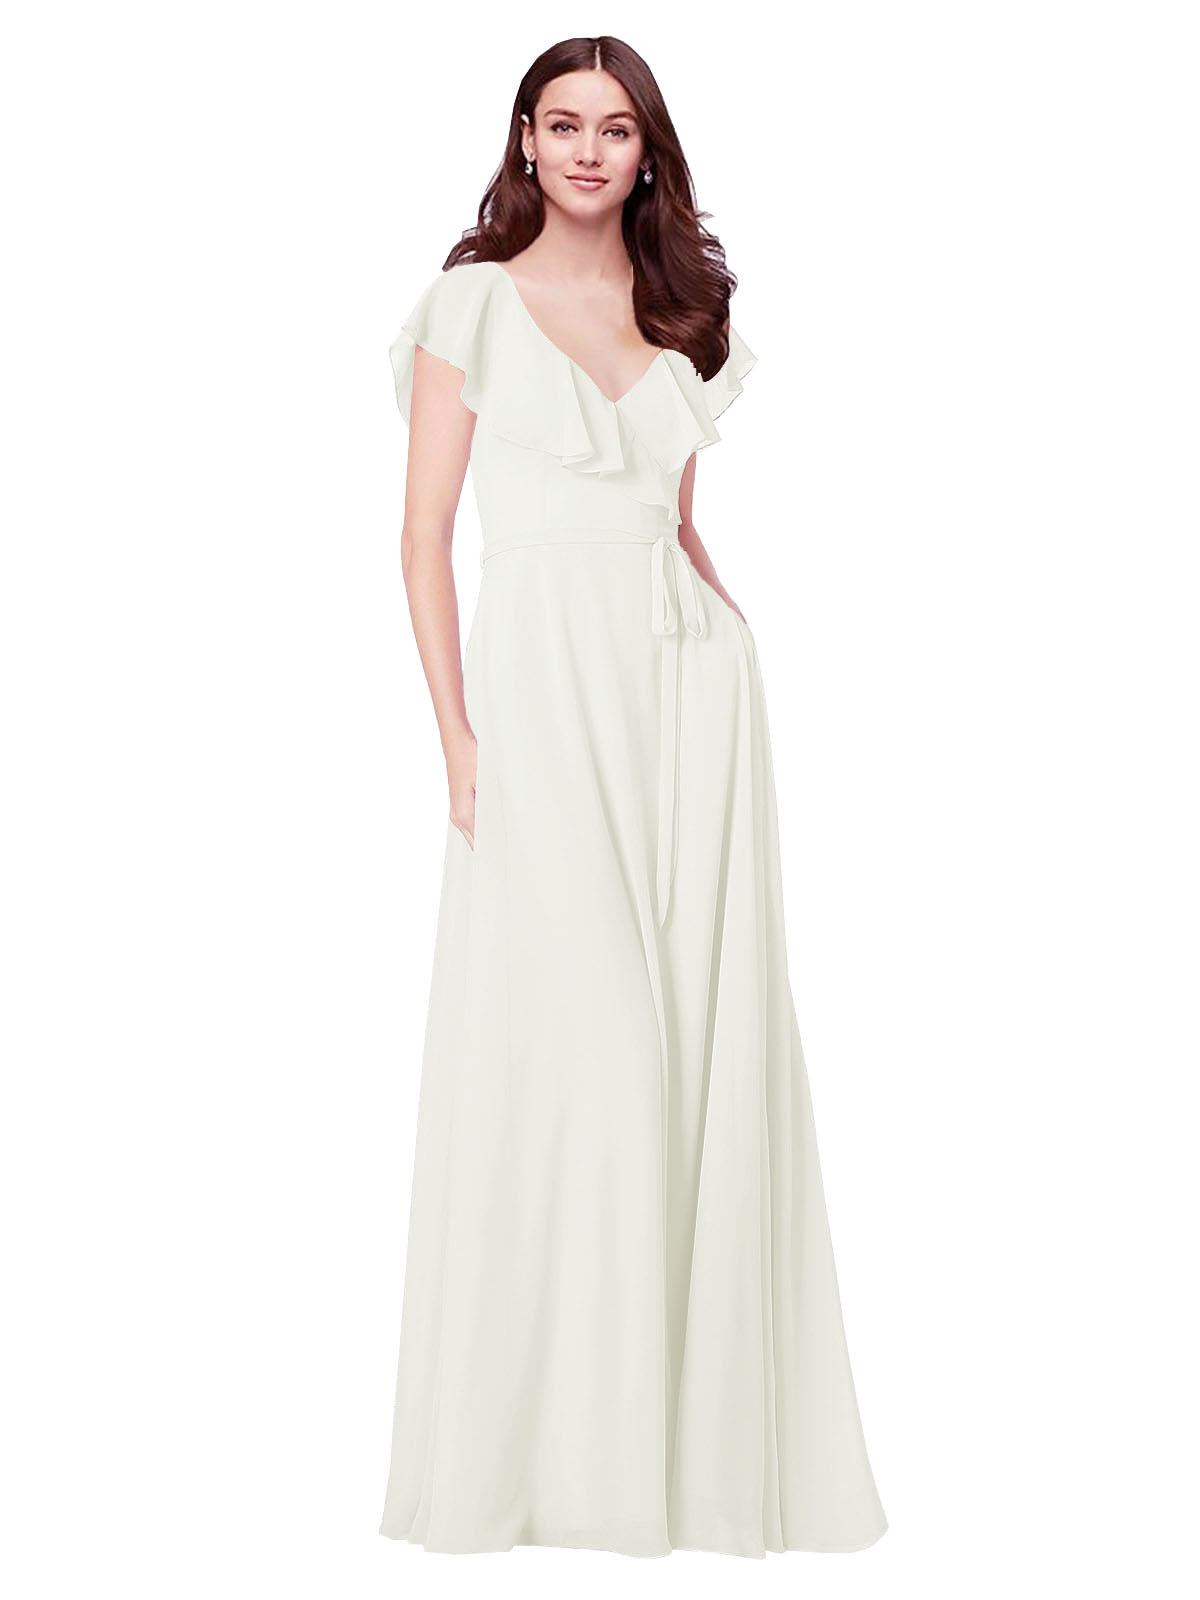 RightBrides Chante Ivory A-Line V-Neck Cap Sleeves Long Bridesmaid Dress